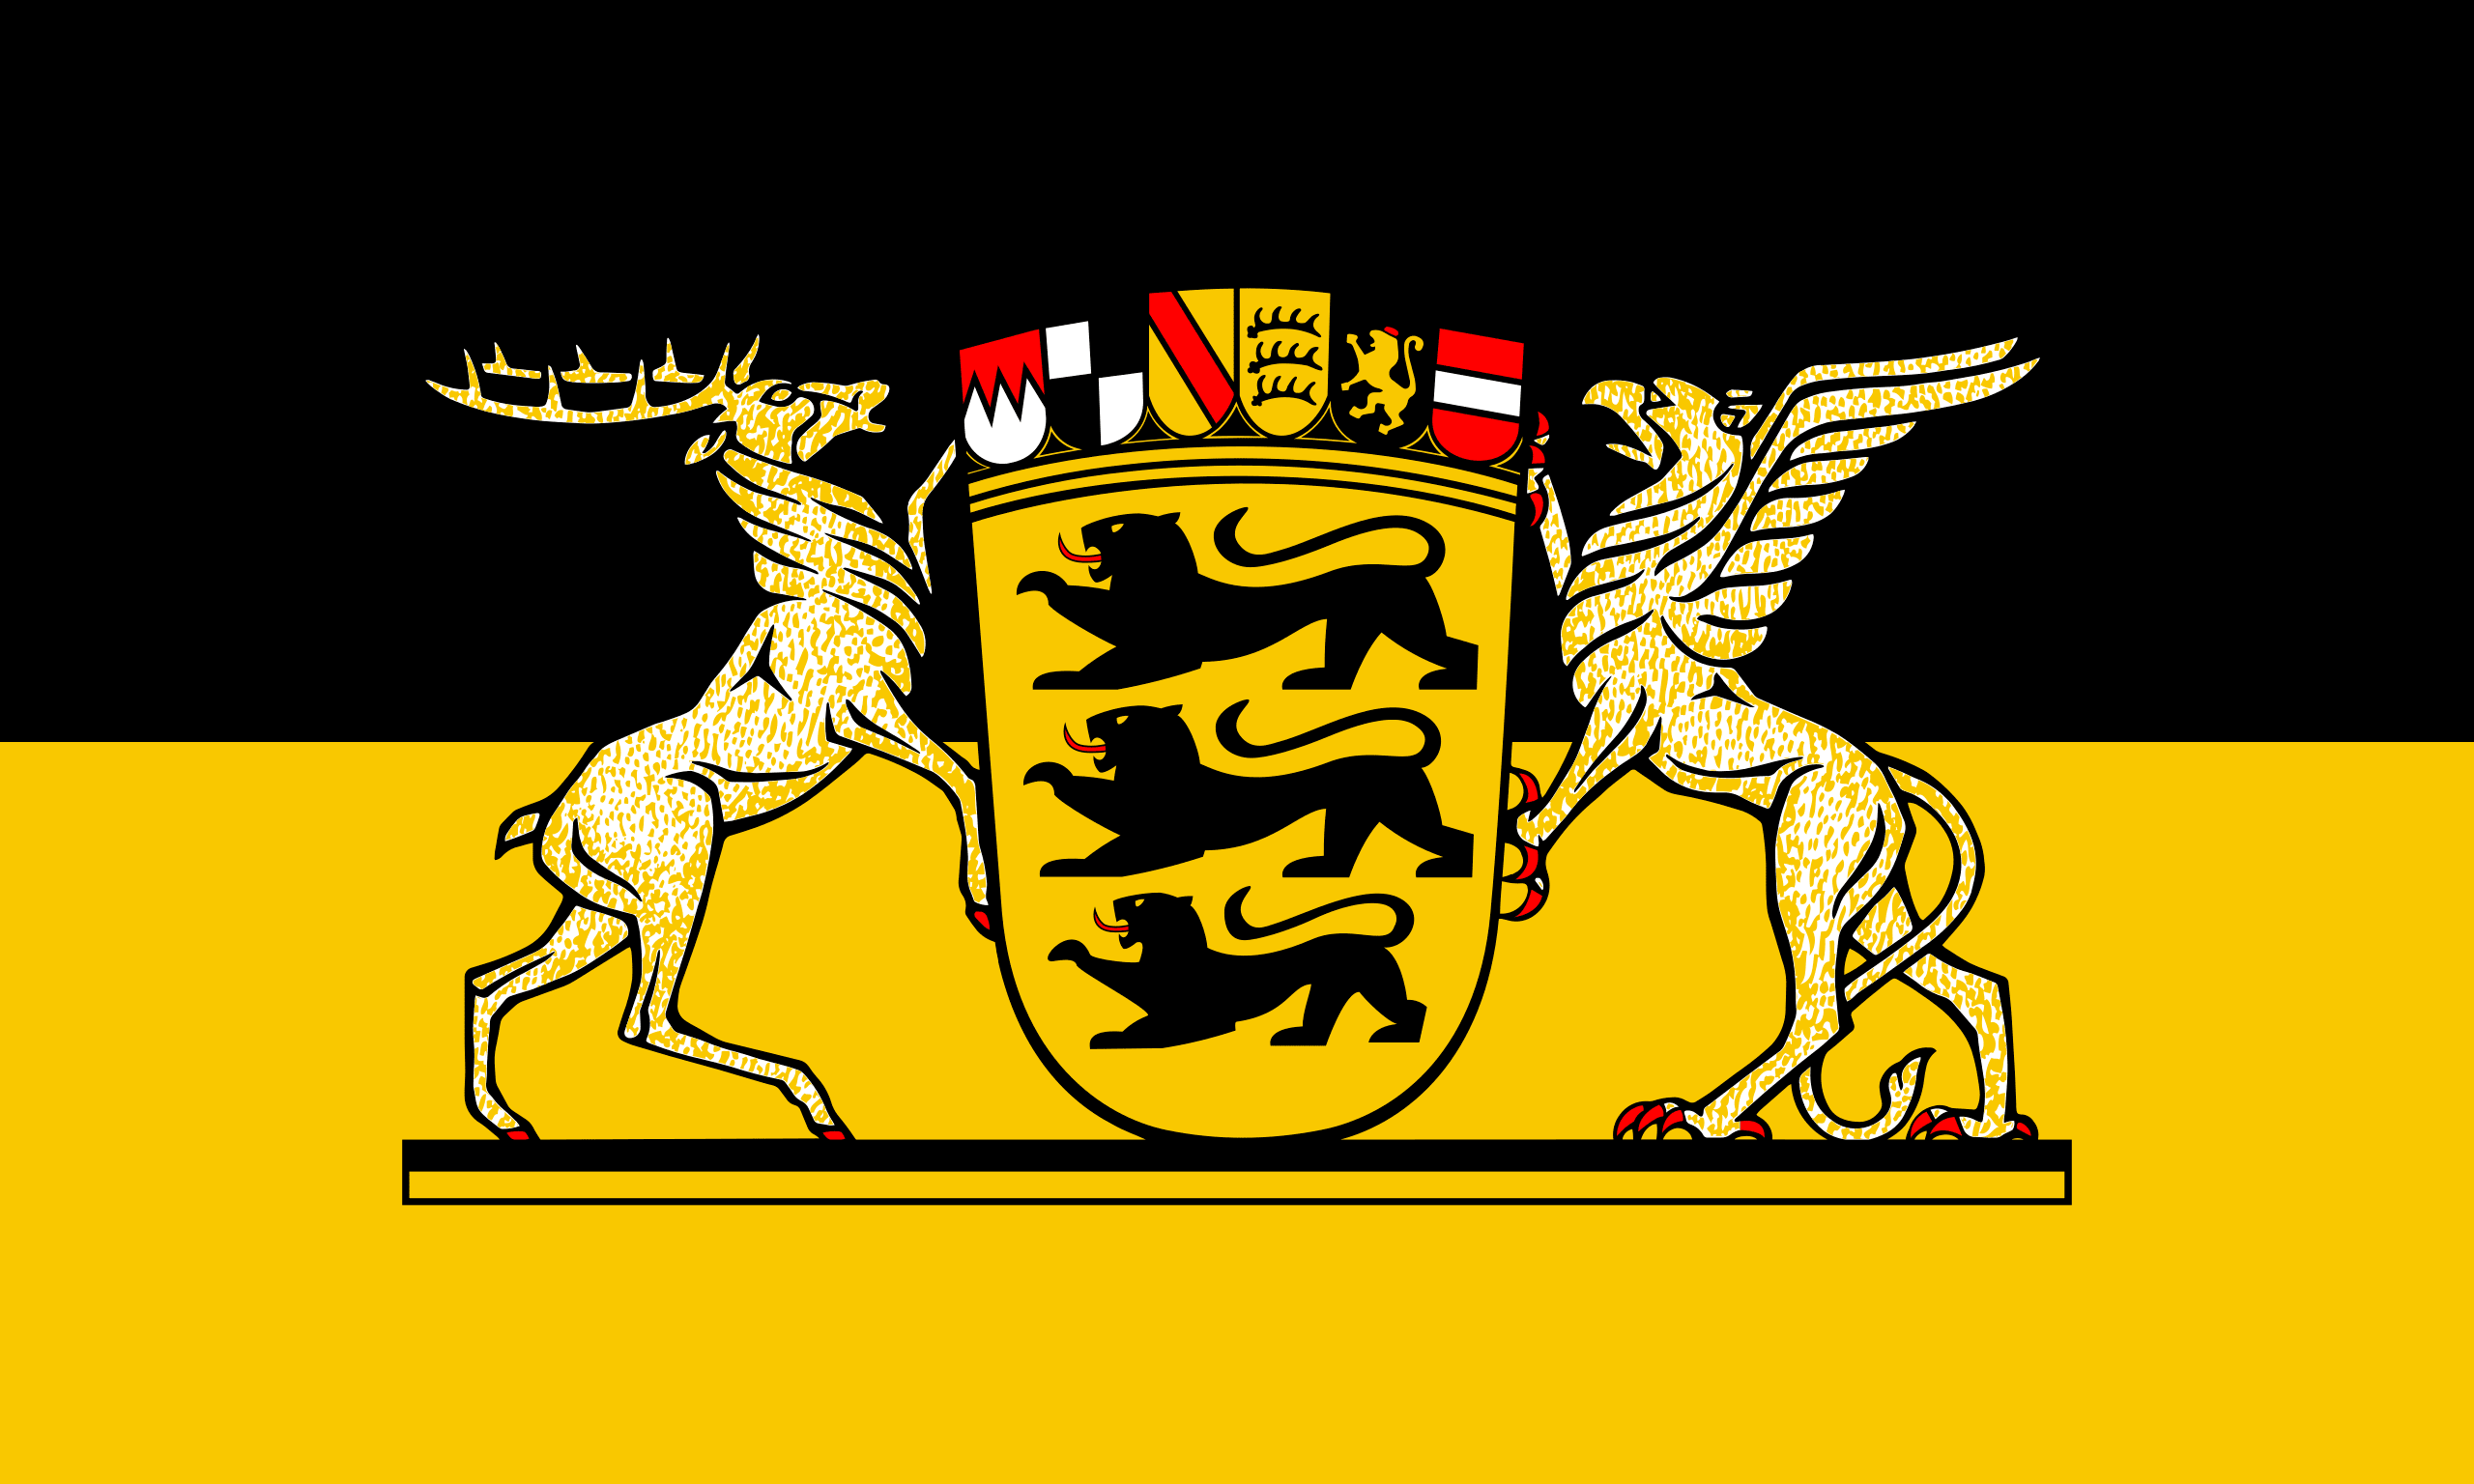 2560px-Flag_of_Baden-W%C3%BCrttemberg_%28state%2C_greater_arms%29_2020.svg.png